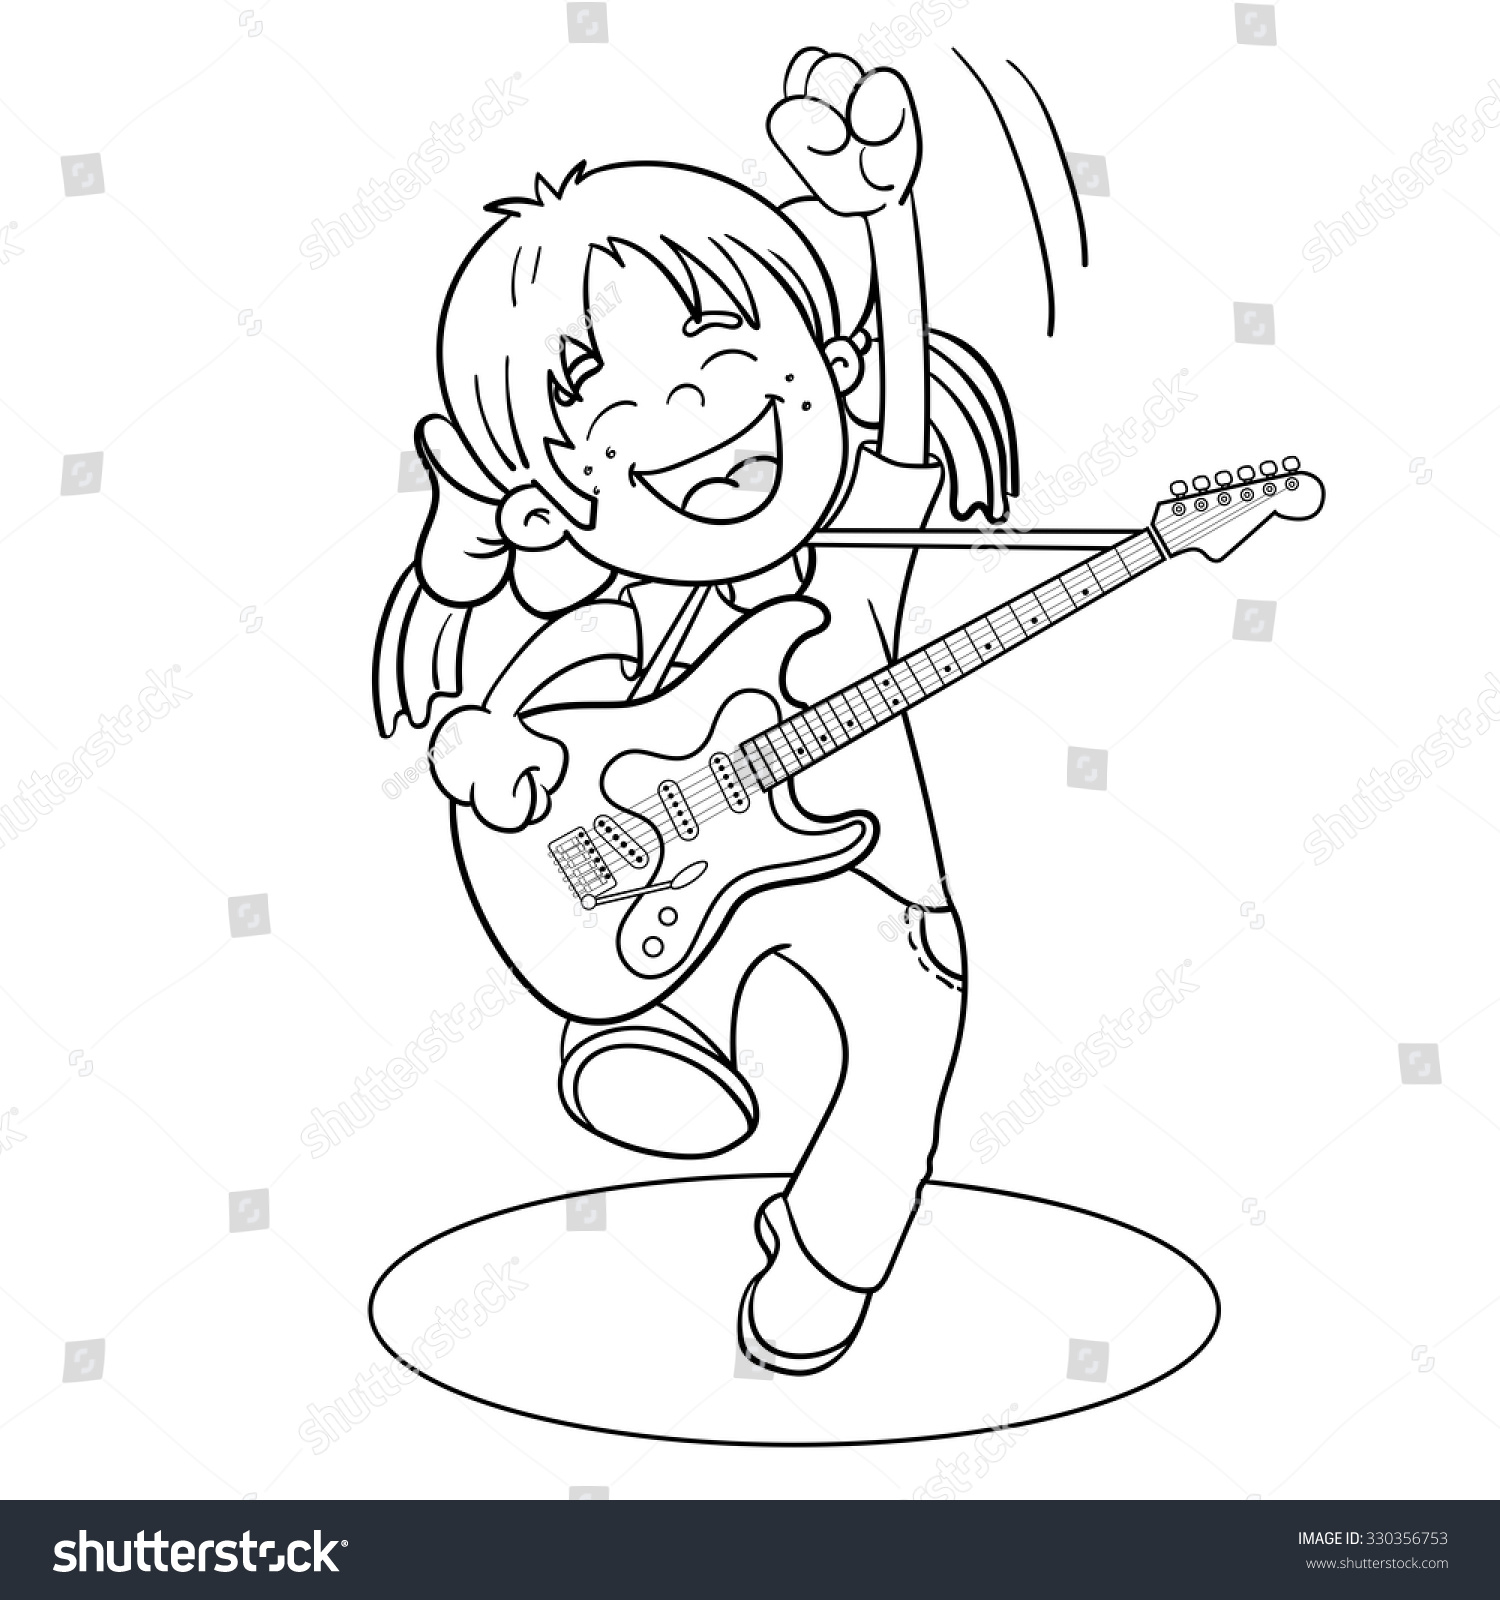 Coloring Page Outline a Cartoon Girl with a guitar isolated on white background